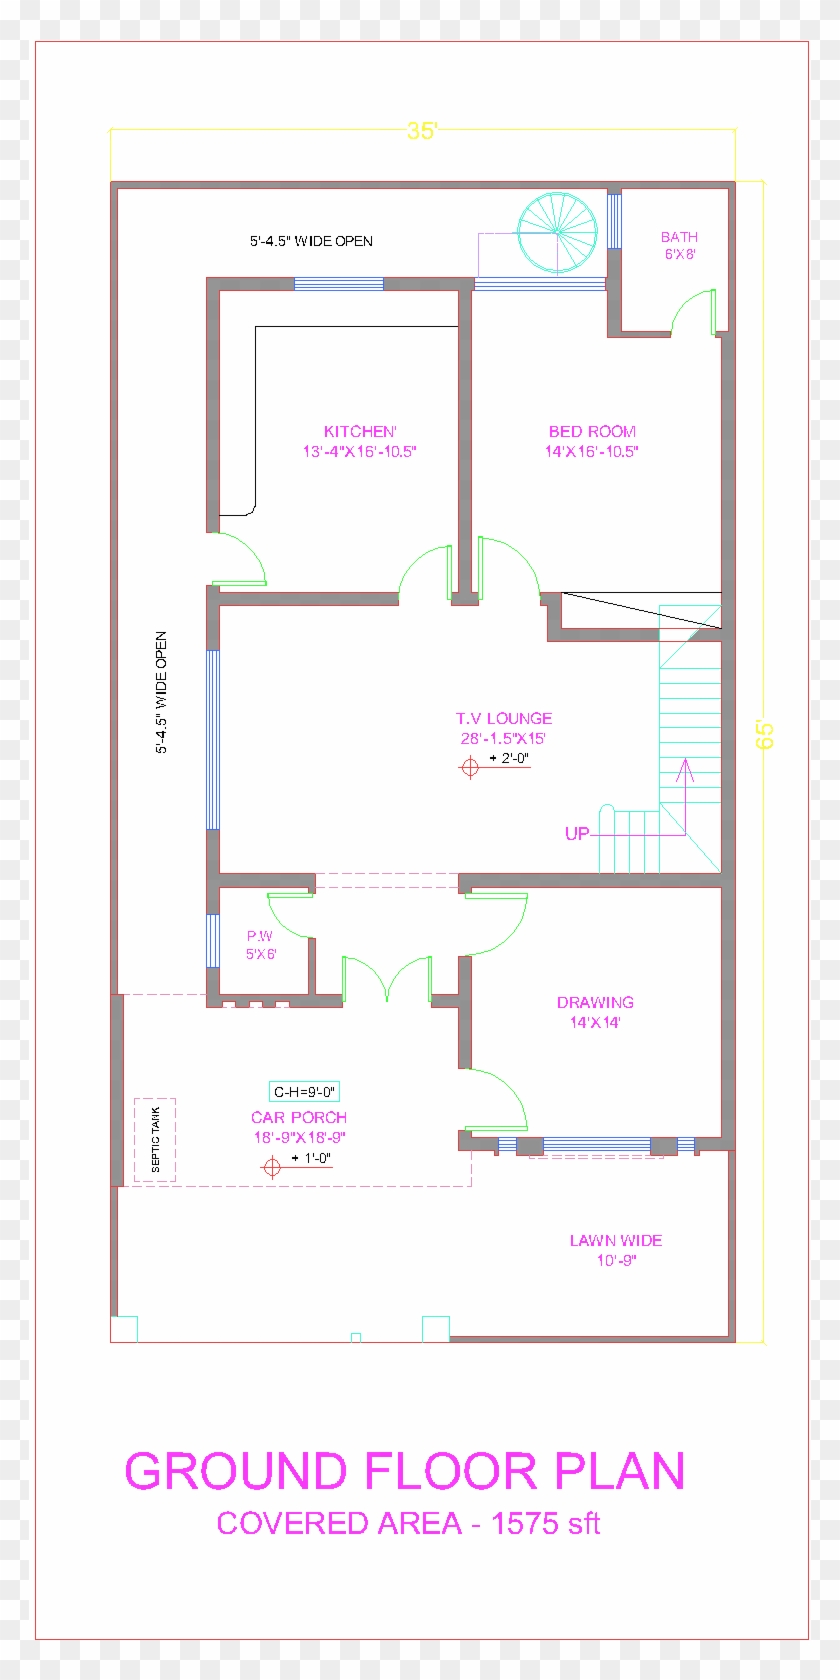 10 Marla House Maps In Pakistan - Map For 10 Marla Houses In Pakistan Clipart #3320204